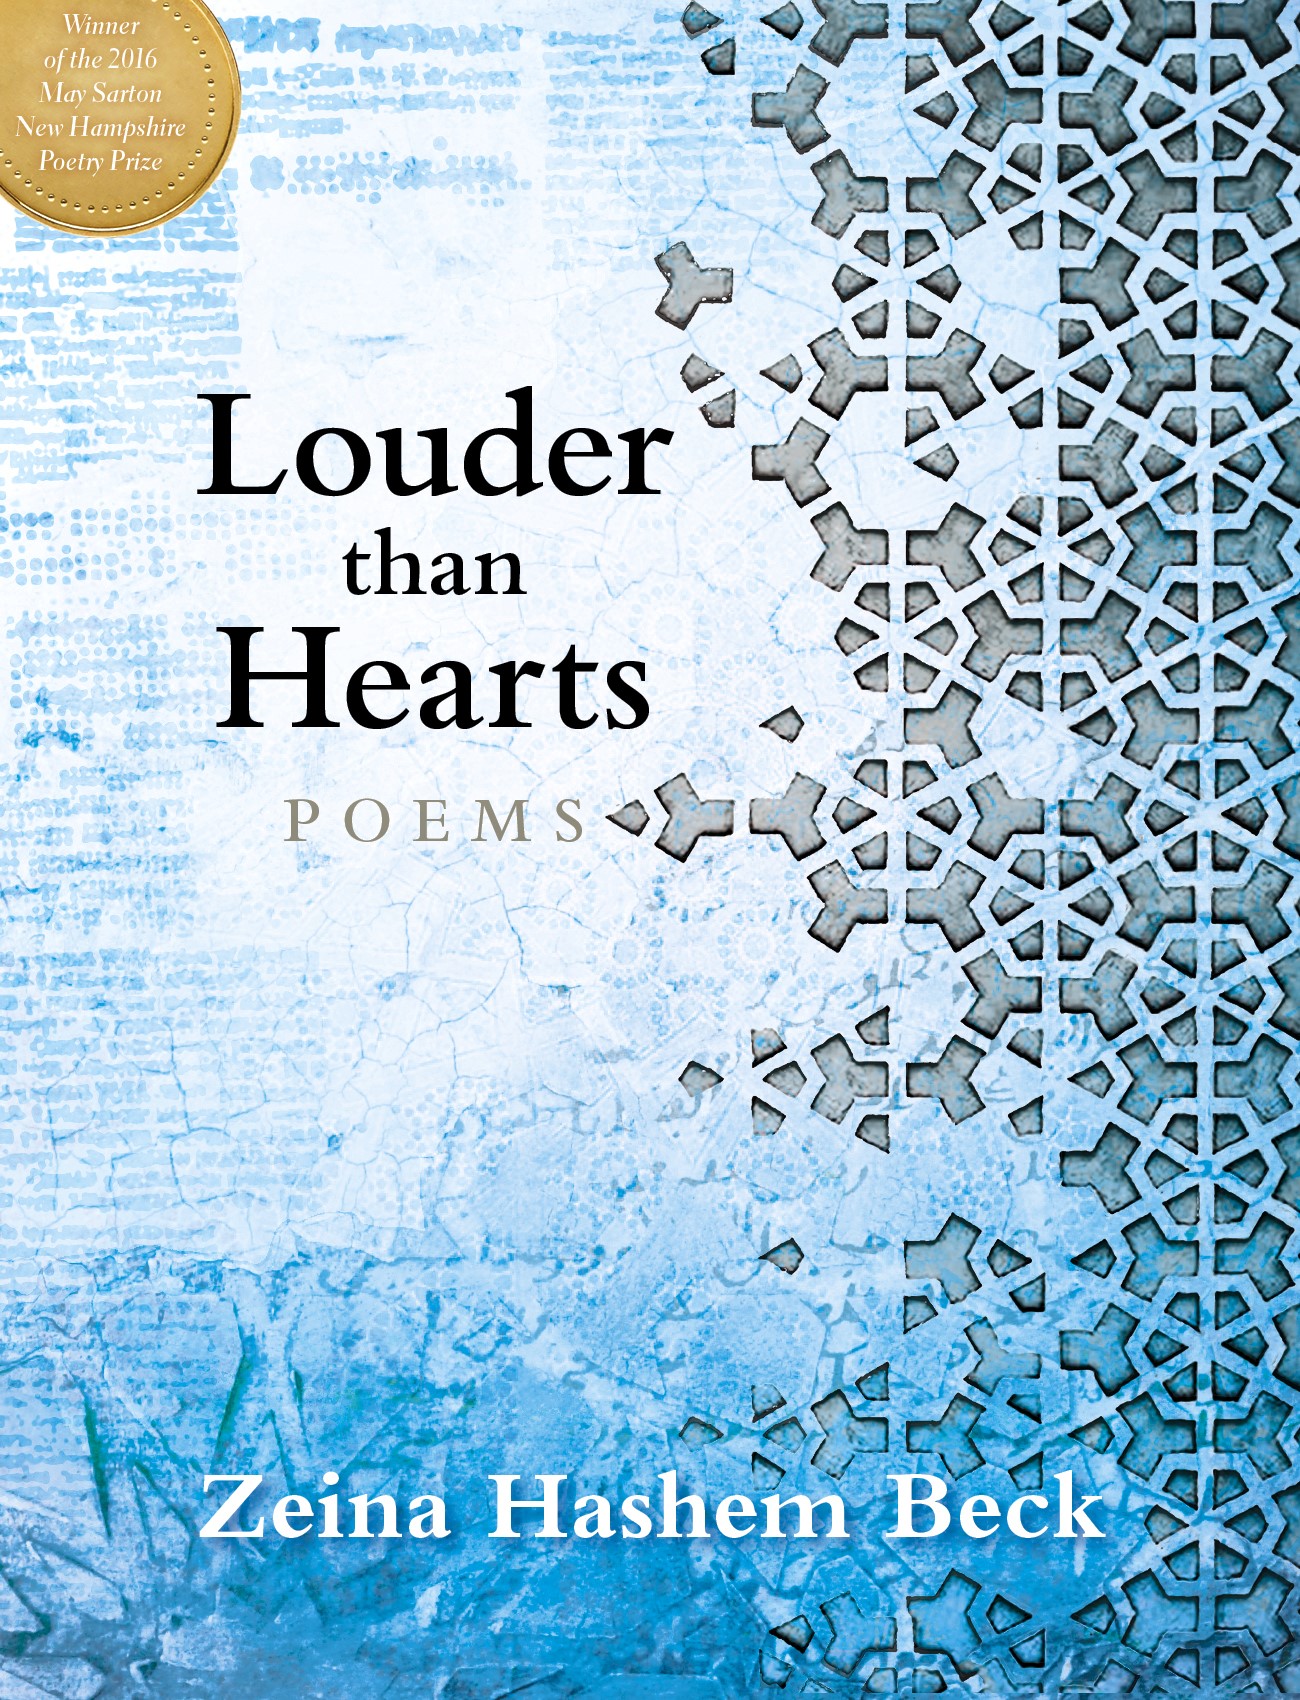 Cover of Zeina Hashem Beck's "Louder than Hearts" (published by Bauhan Publishing)